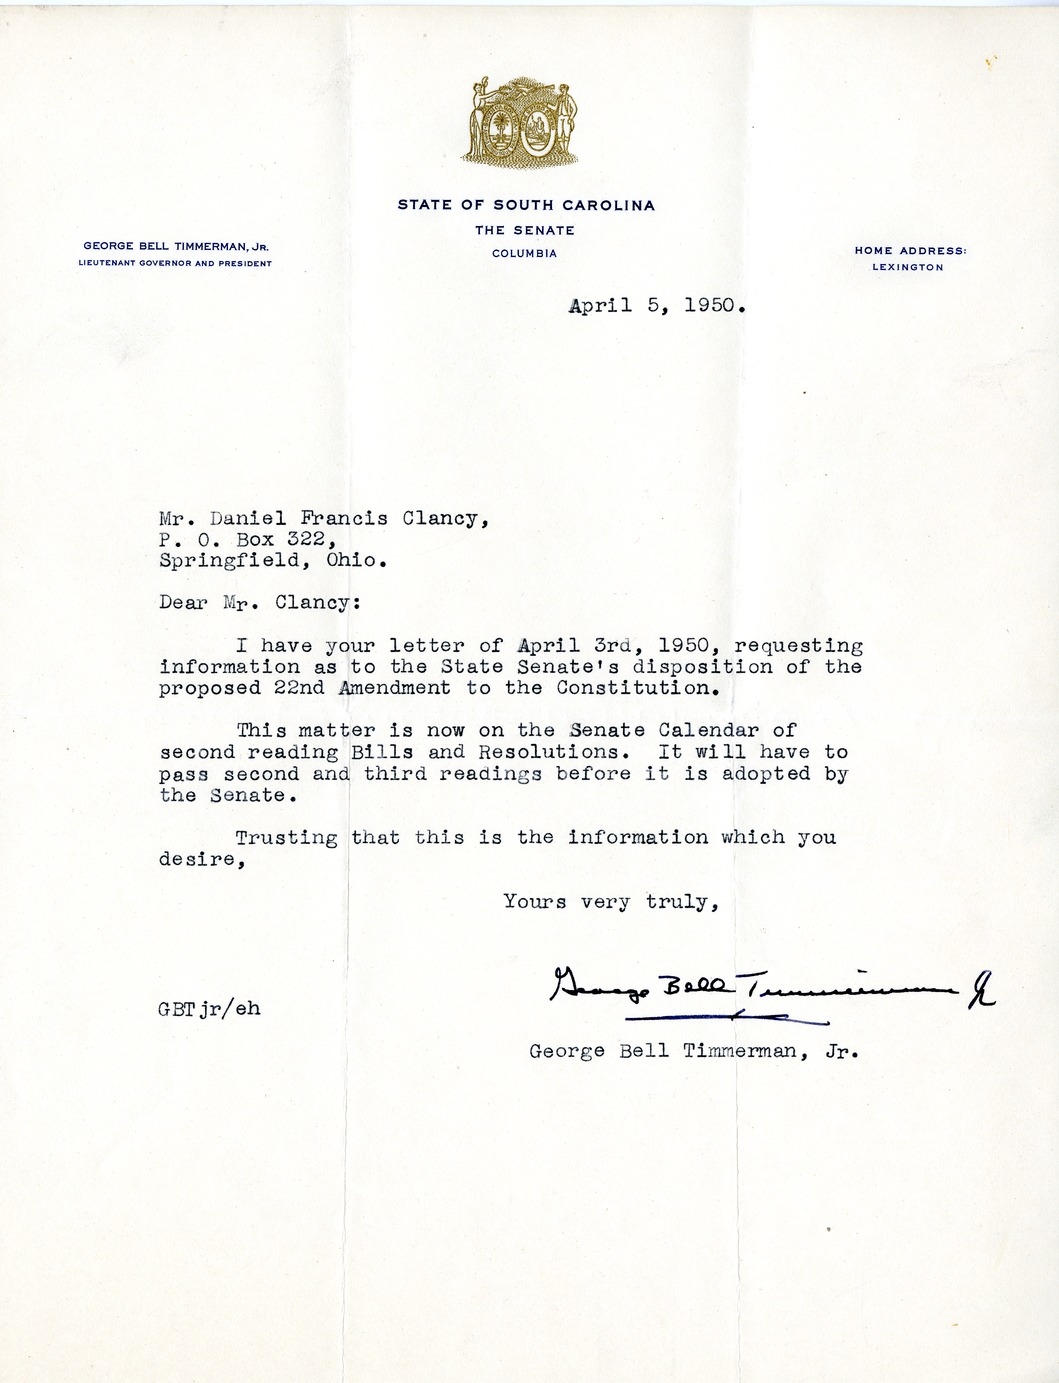 Letter from George Bell Timmerman, Jr. to Daniel F. Clancy